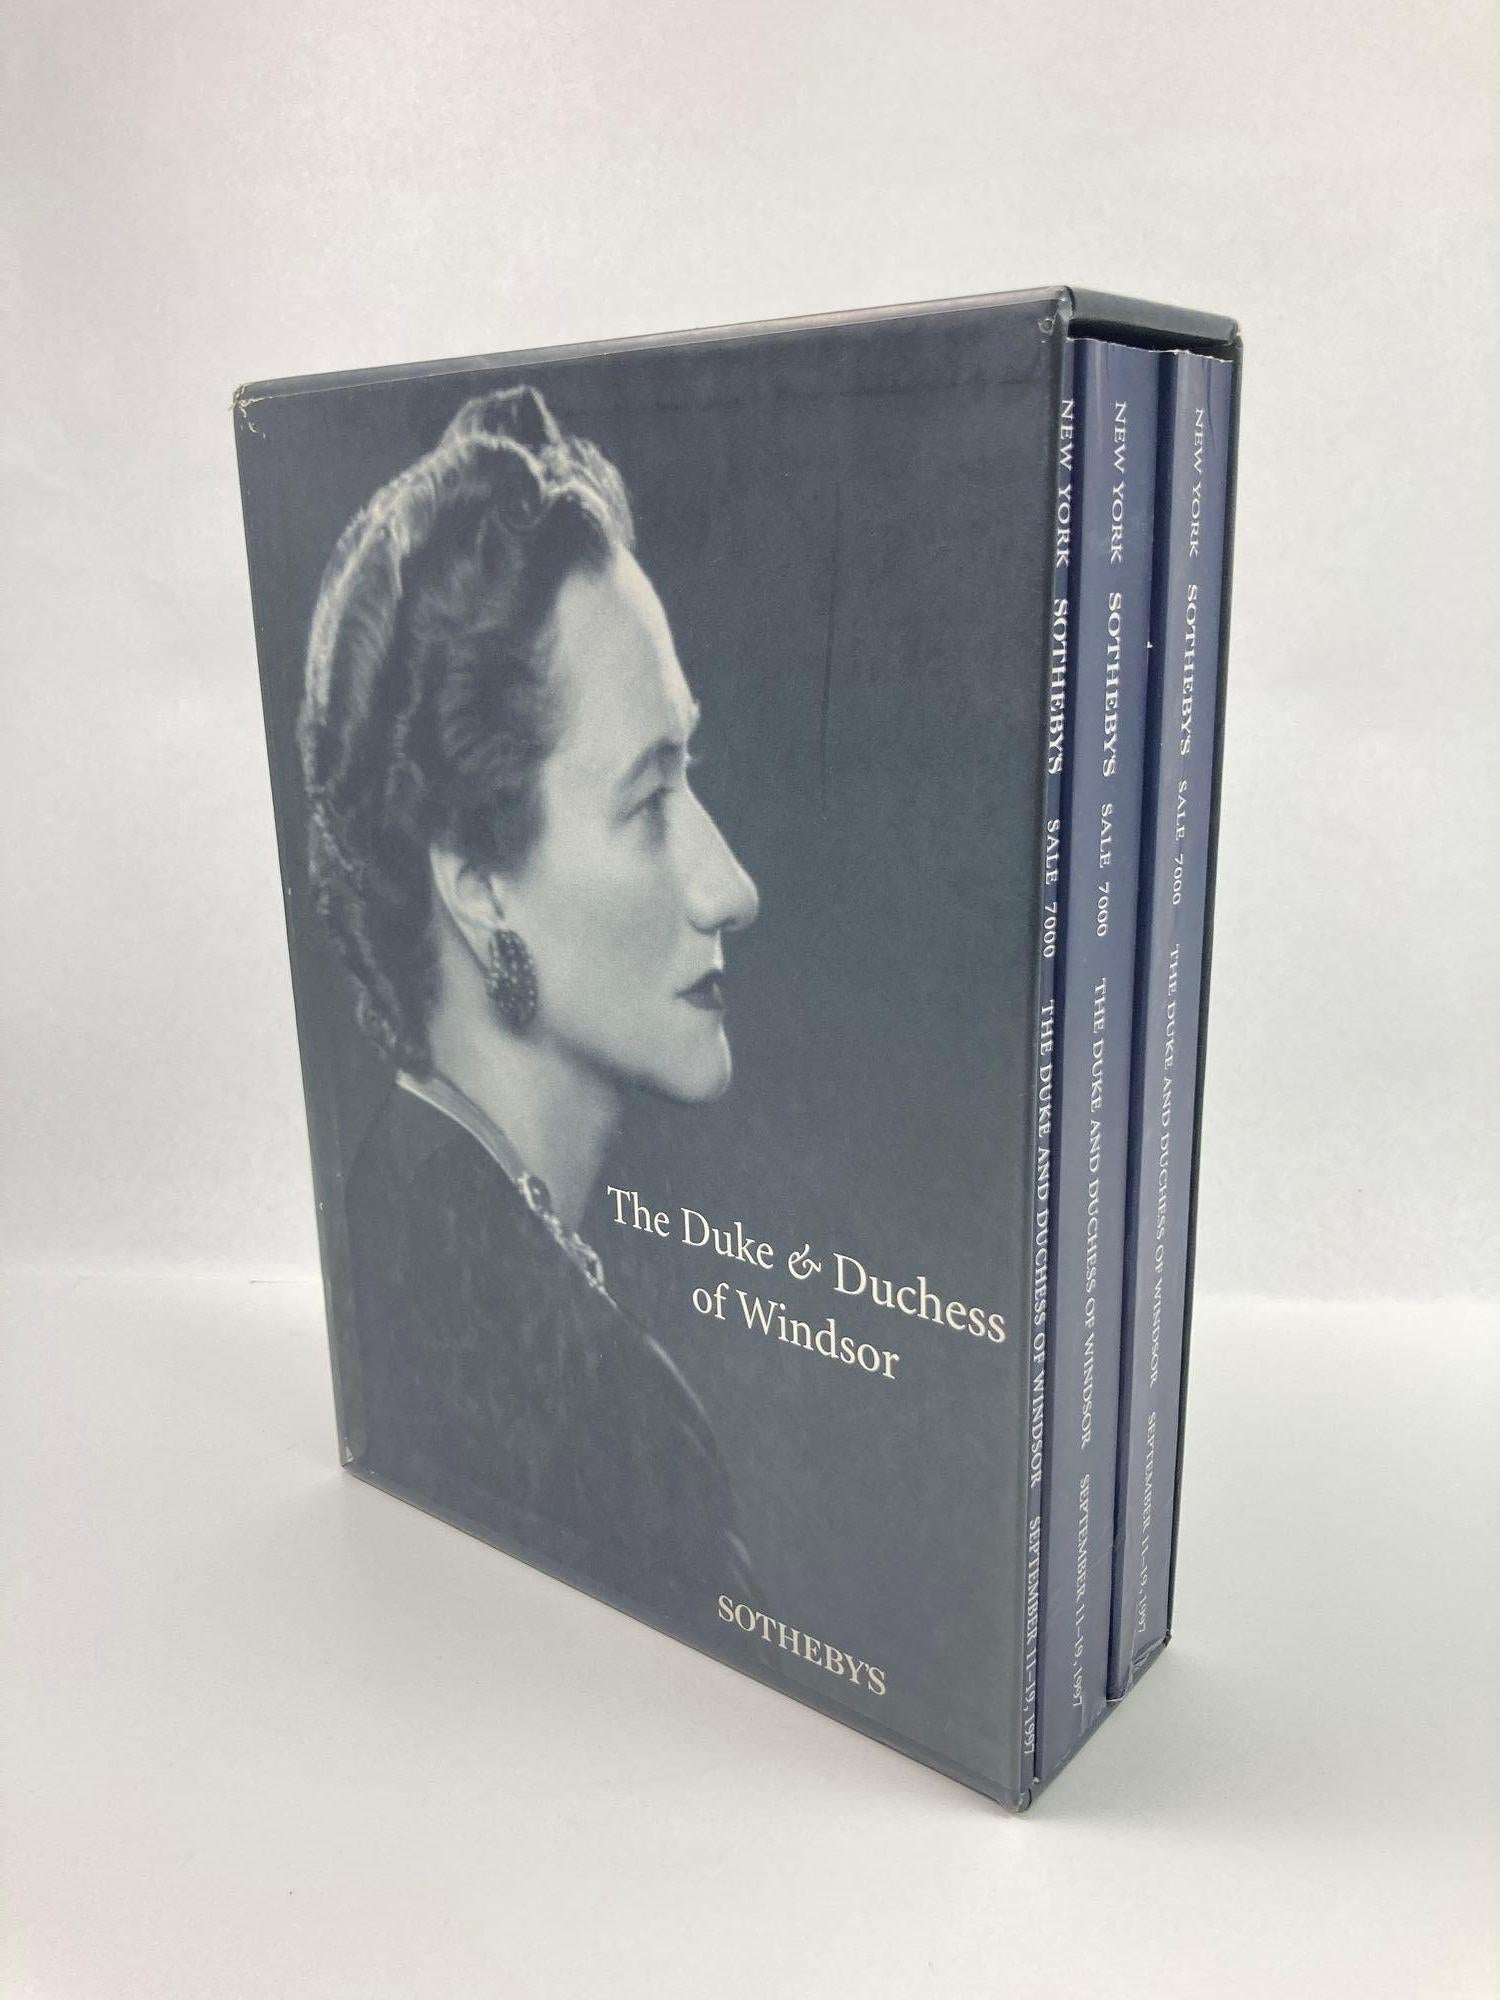 Victorian The Duke and Duchess of Windsor Auction Sothebys Books Catalogs in Slipcase Box For Sale